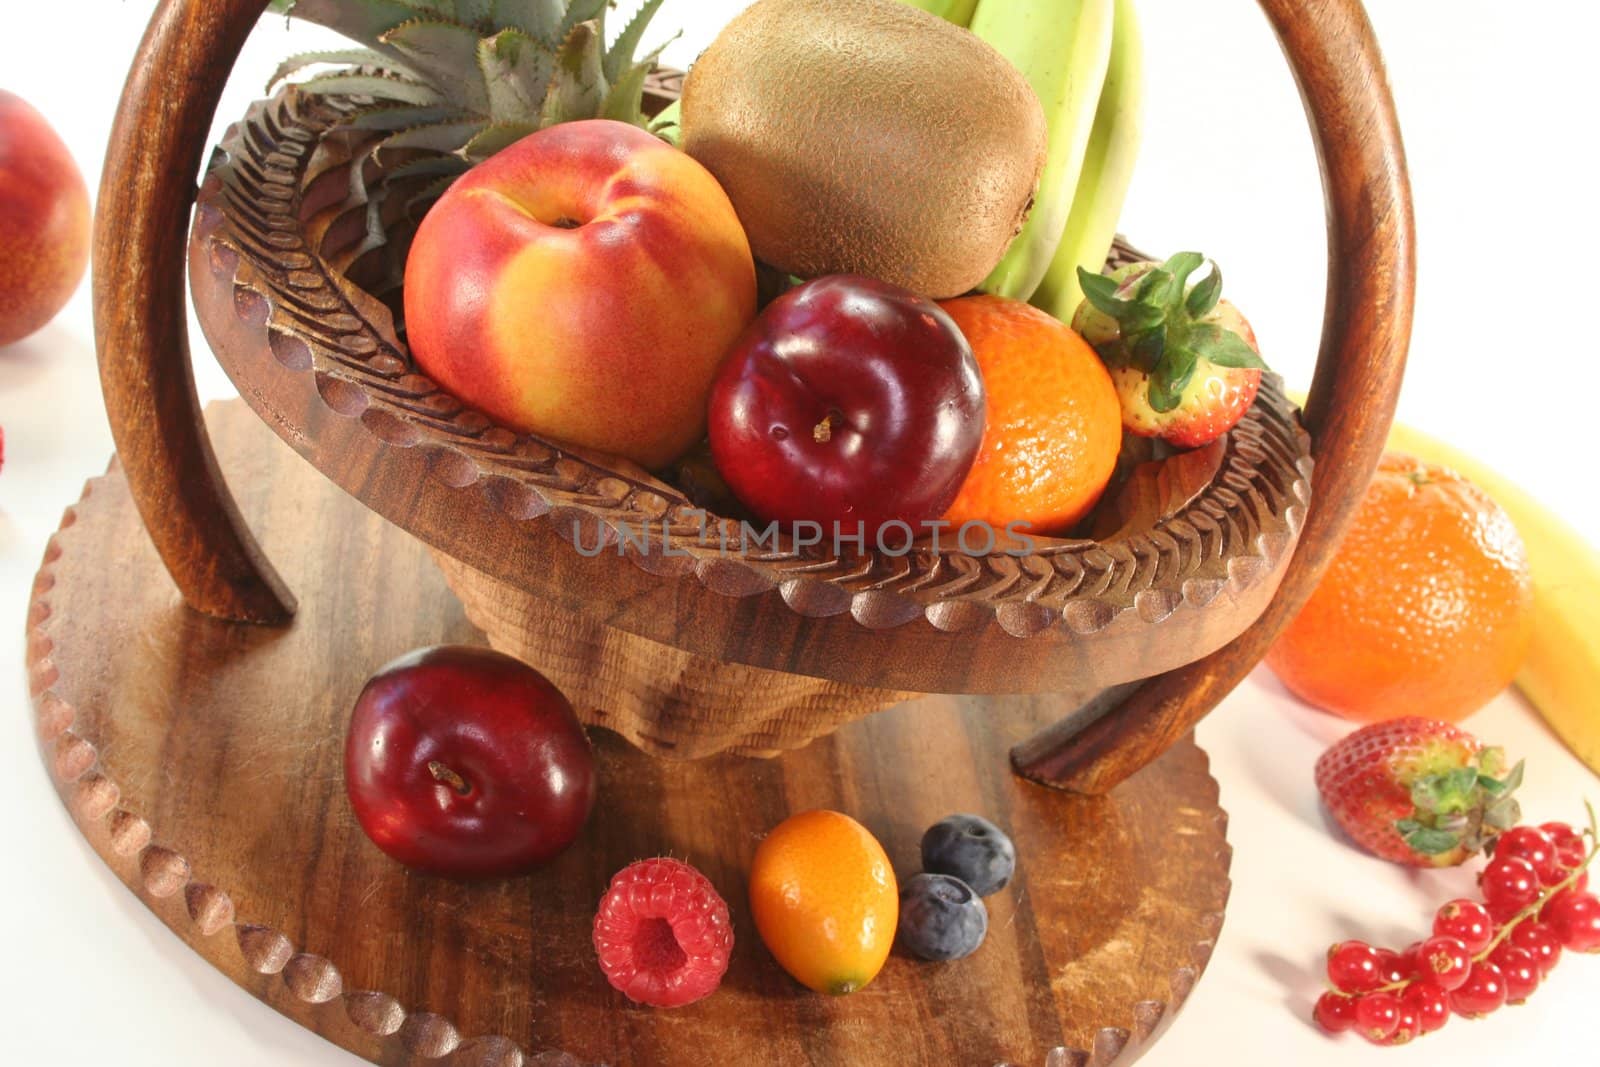 Fruit Mix in the basket by discovery